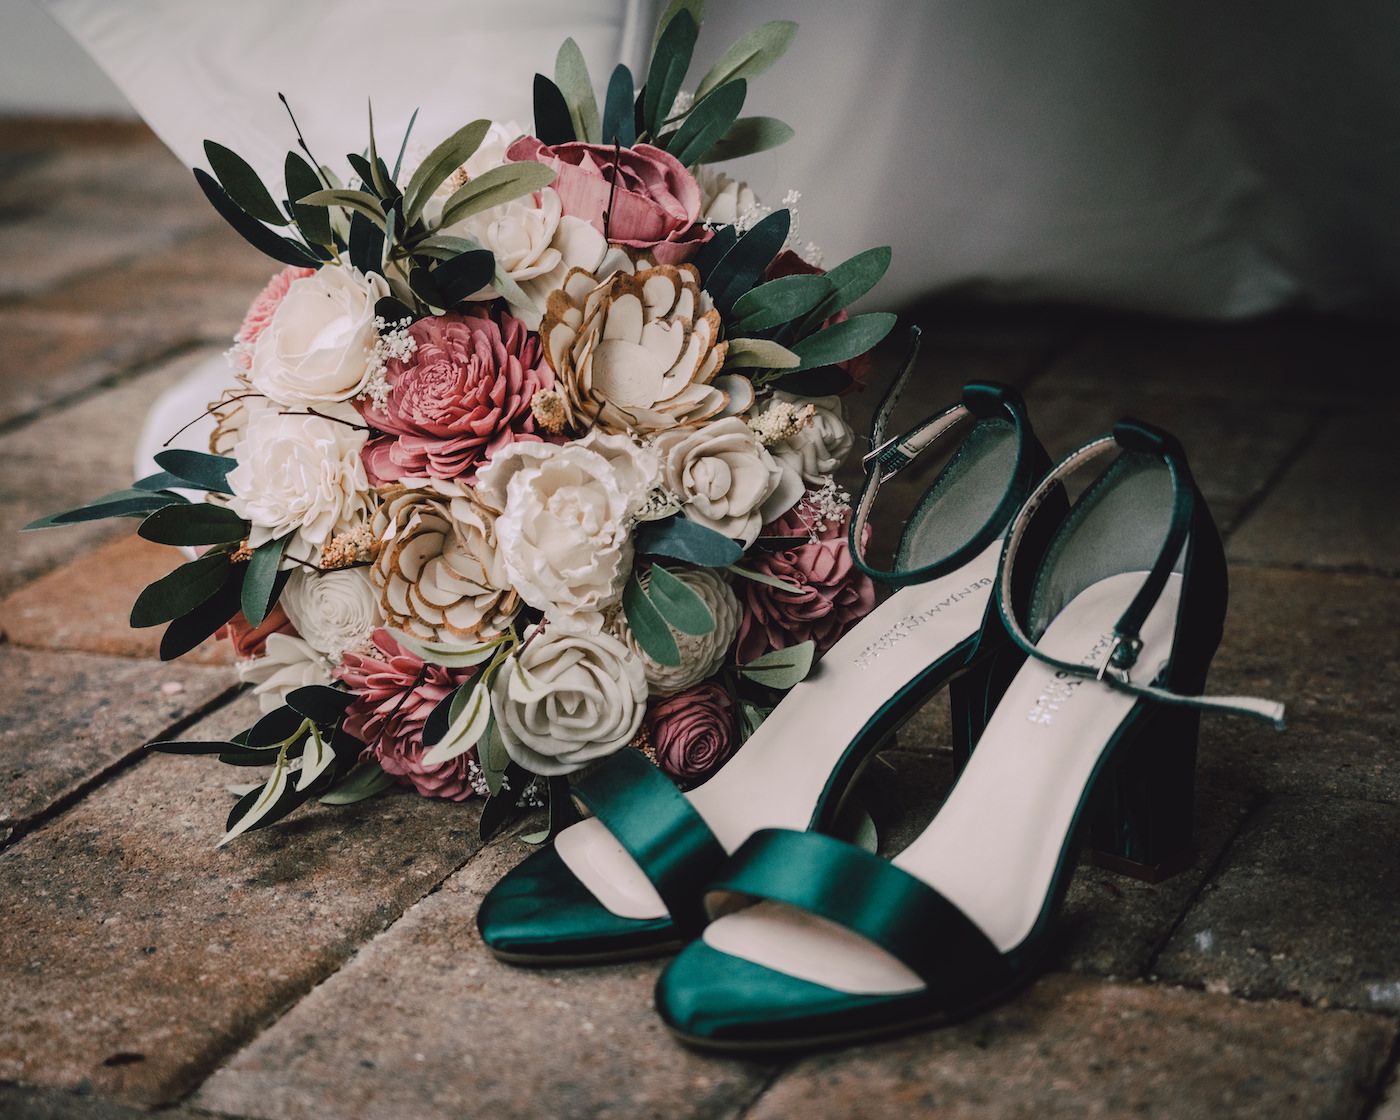 Emerald Green Satin Wedding Bride Shoes with Paper Flower Bouquet with Wood Roses